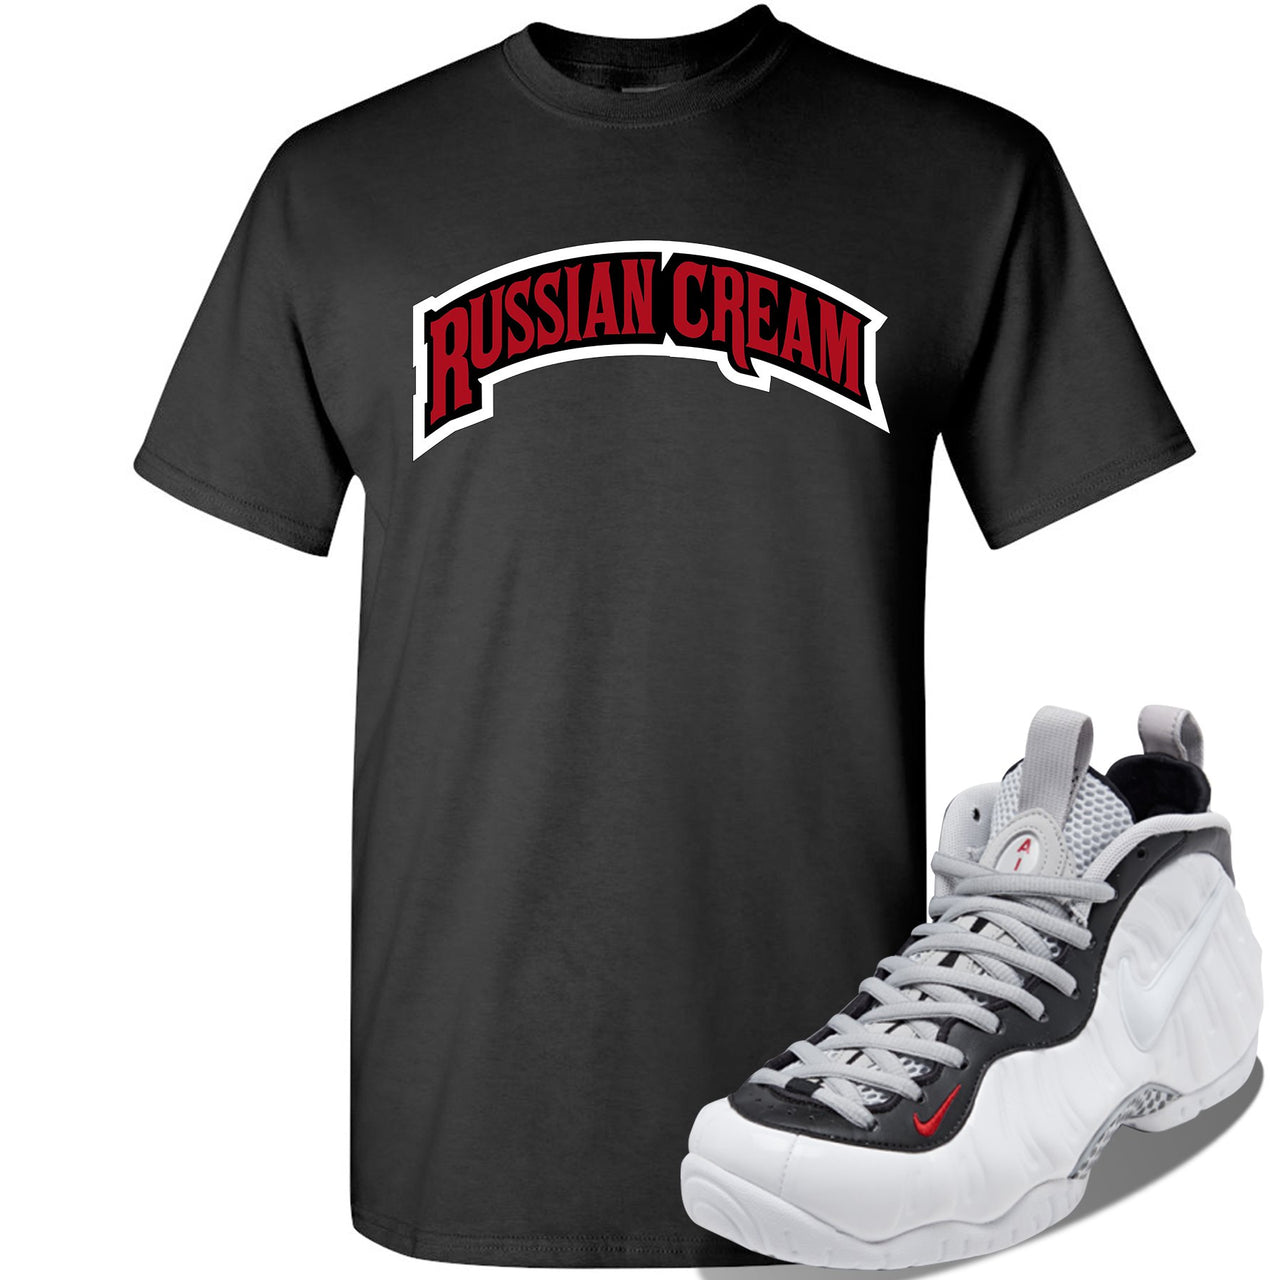 Foamposite Pro White Black University Red Sneaker Black T Shirt | Tees to match Nike Air Foamposite Pro White Black University Red Shoes | Russian Cream Arch